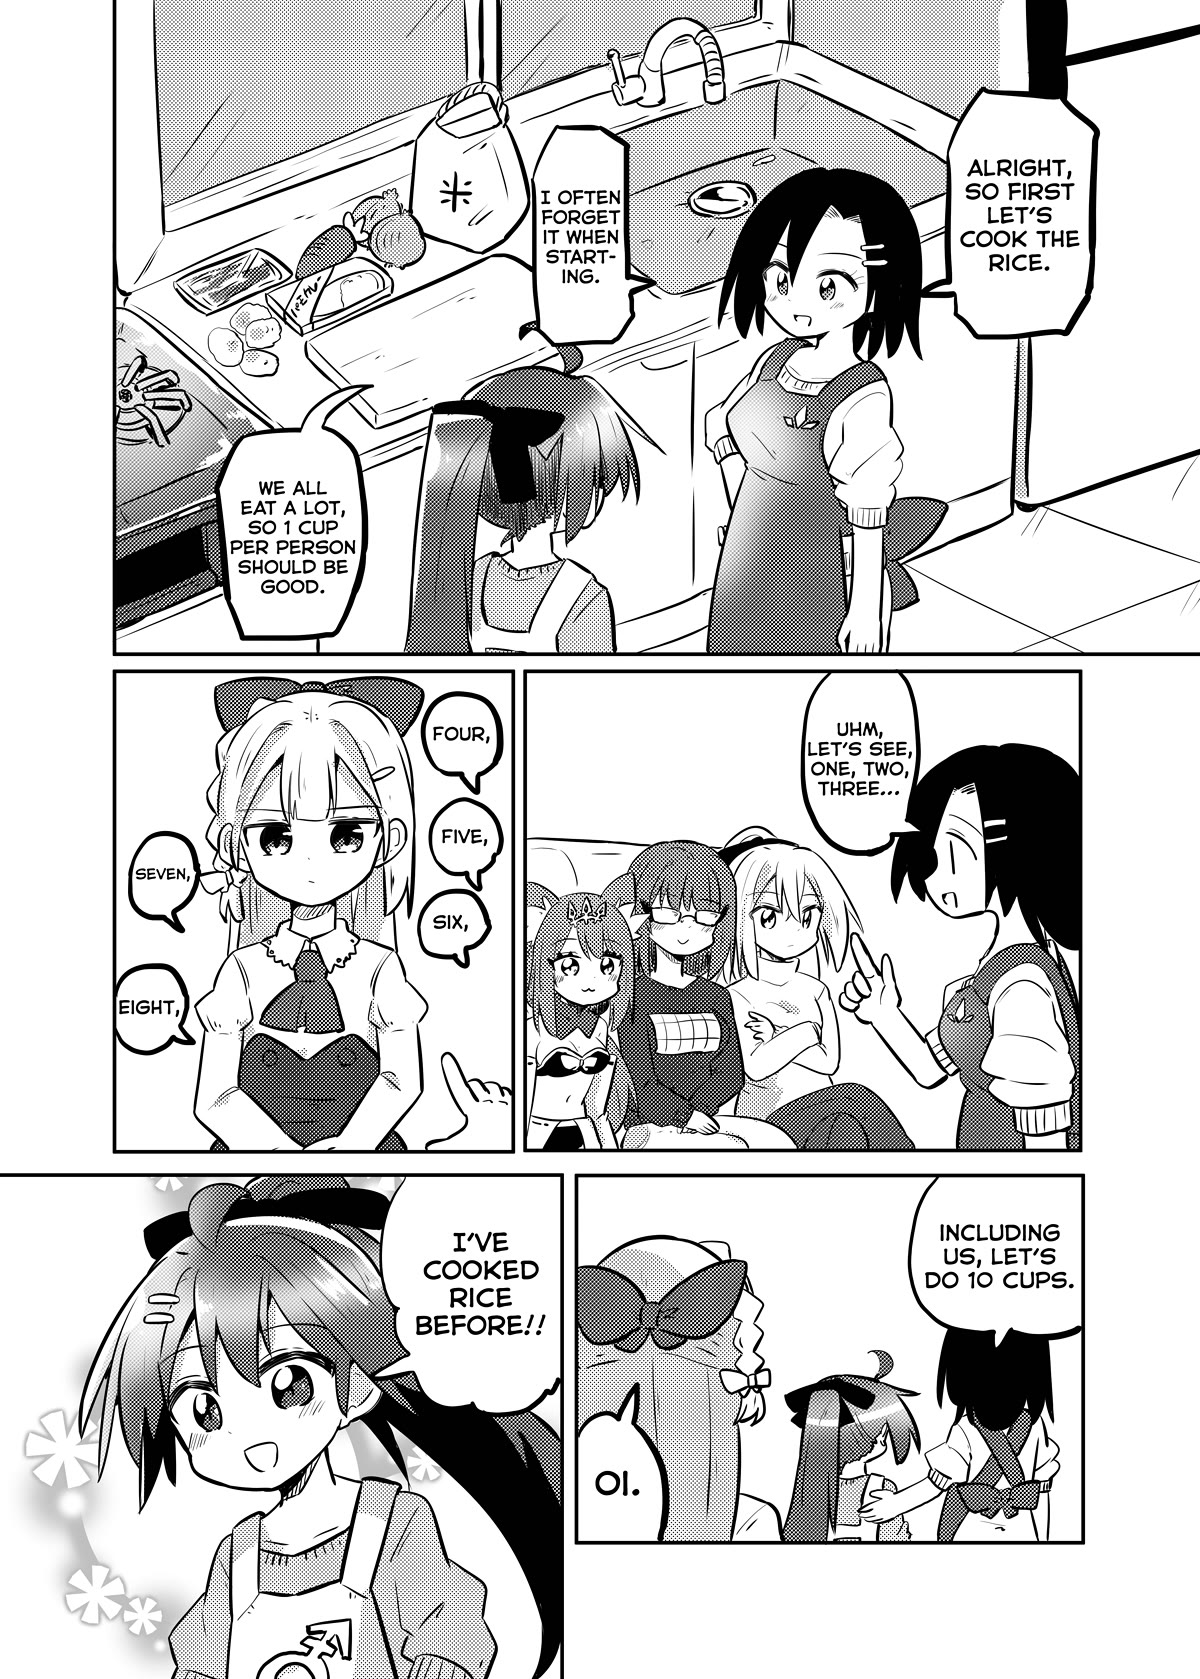 Magical Girl Sho - Page 1